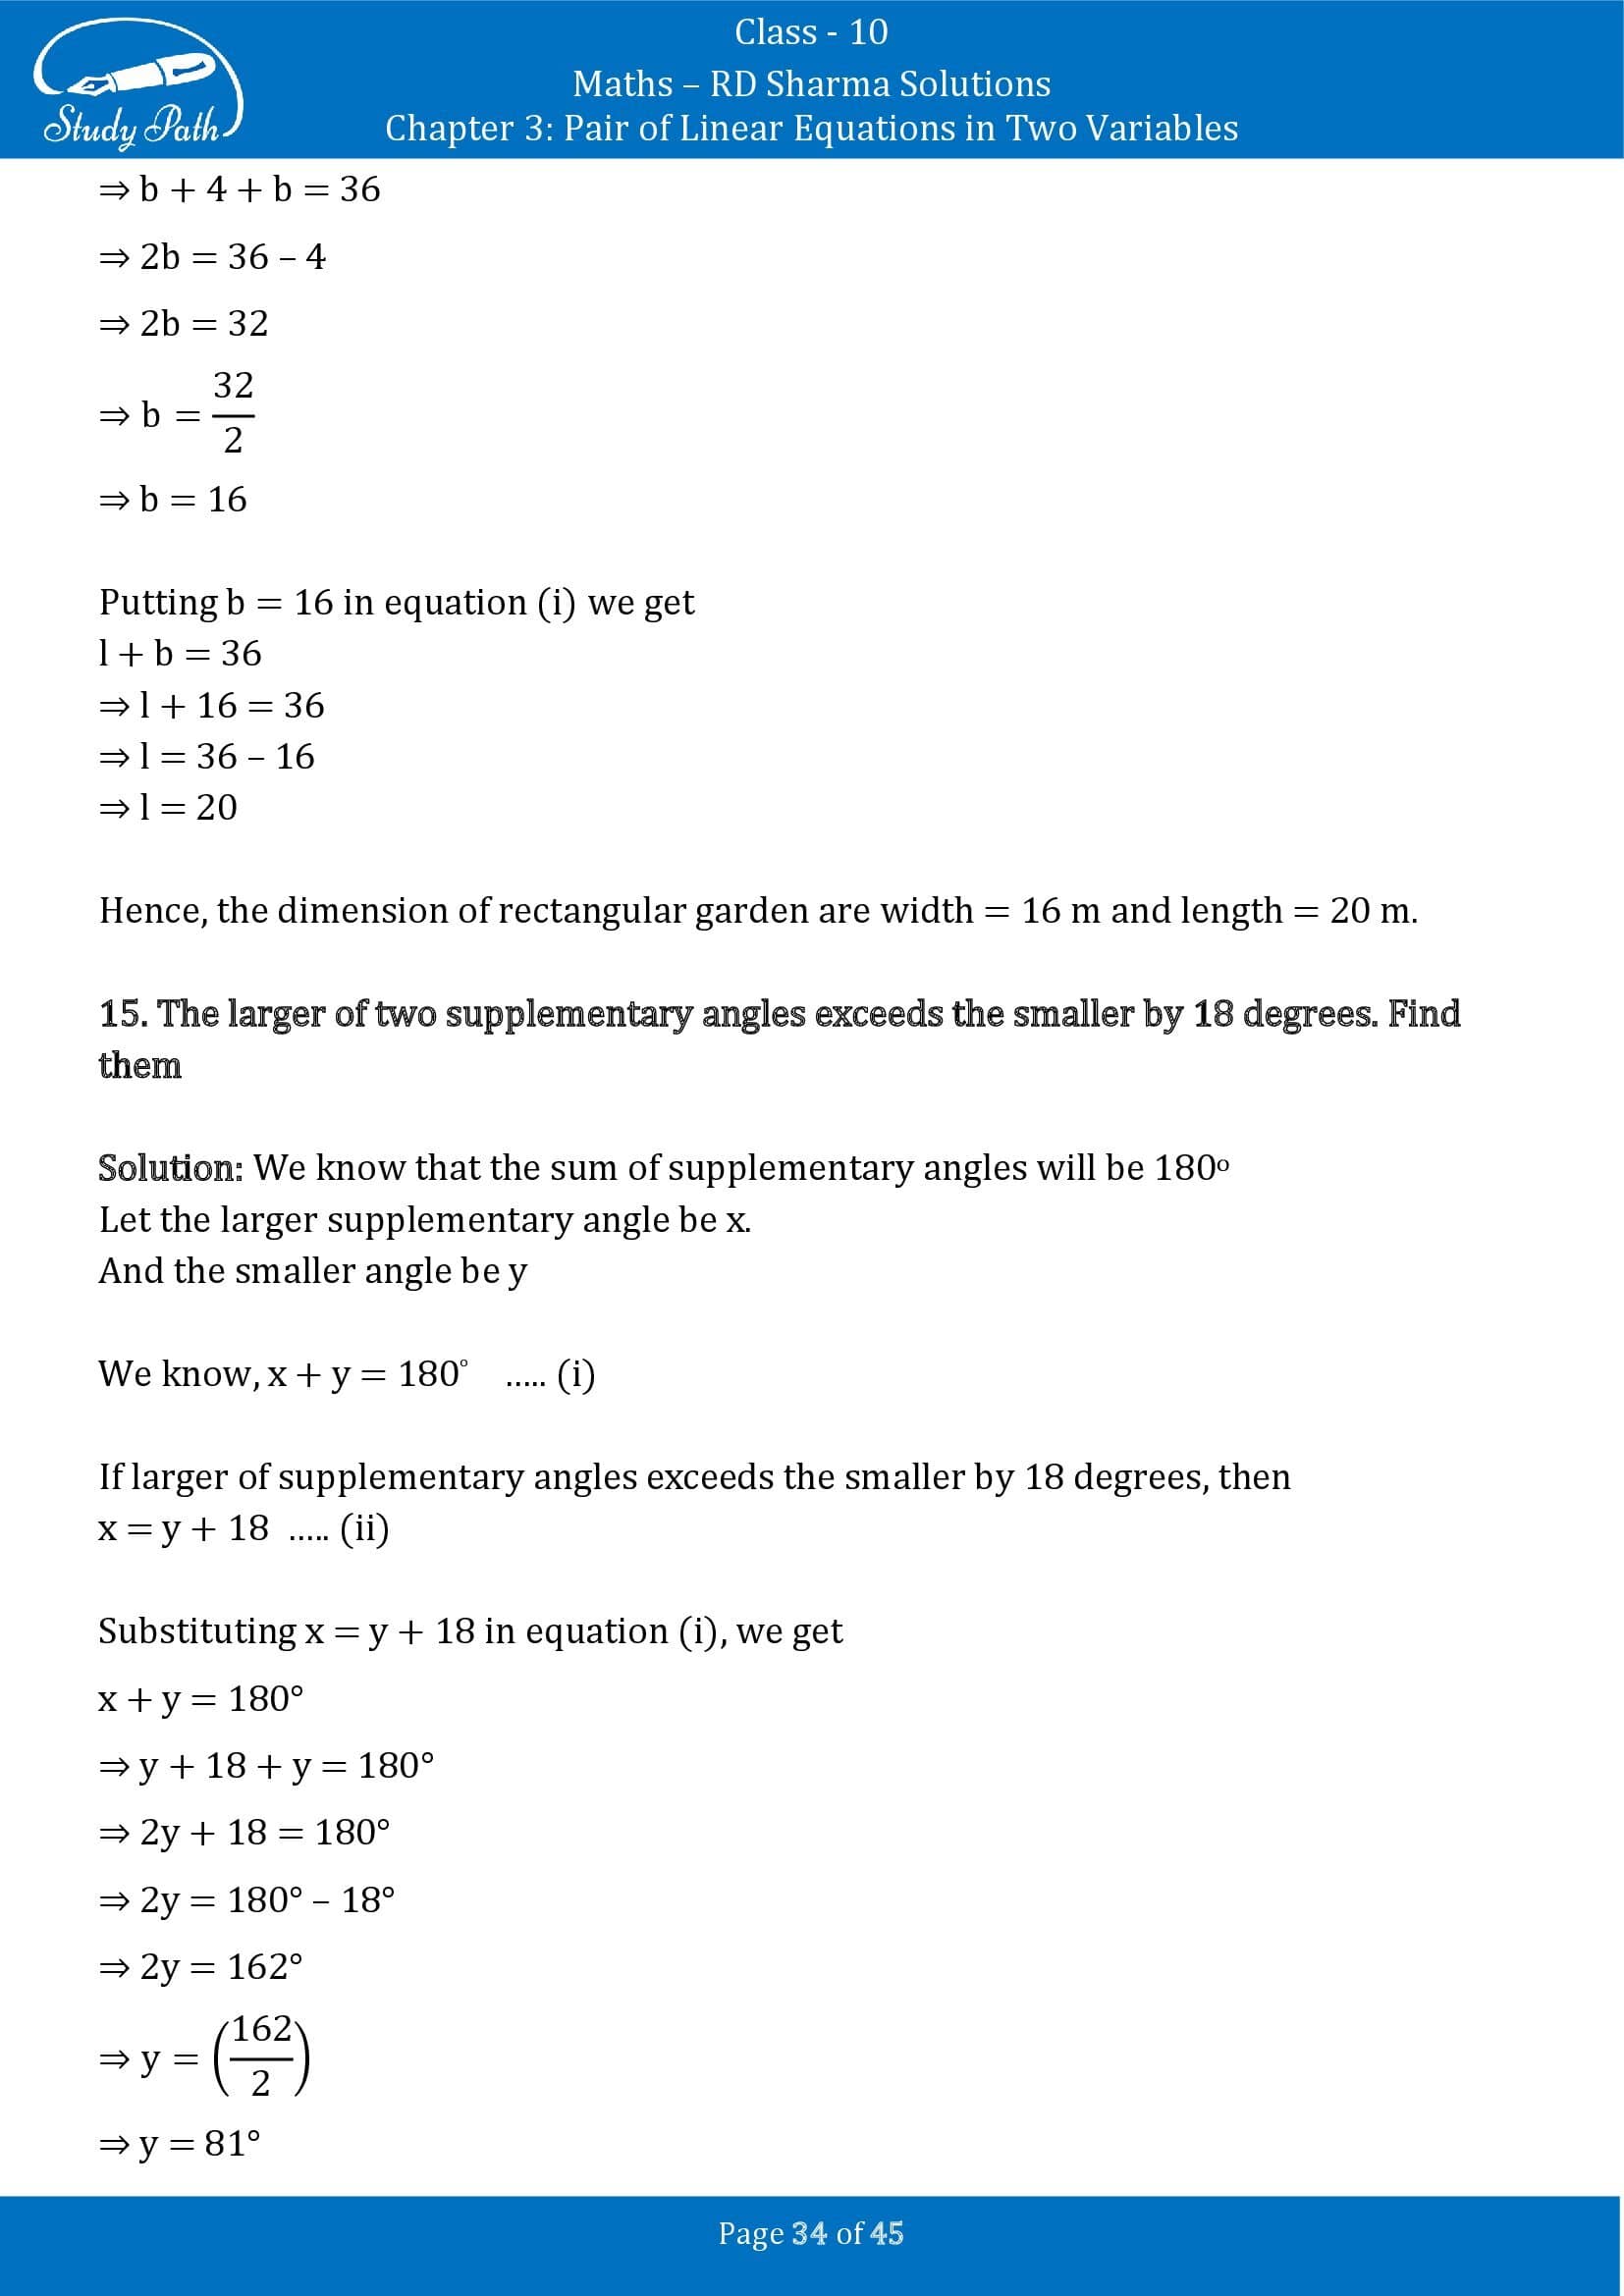 RD Sharma Solutions Class 10 Chapter 3 Pair of Linear Equations in Two Variables Exercise 3.11 00034